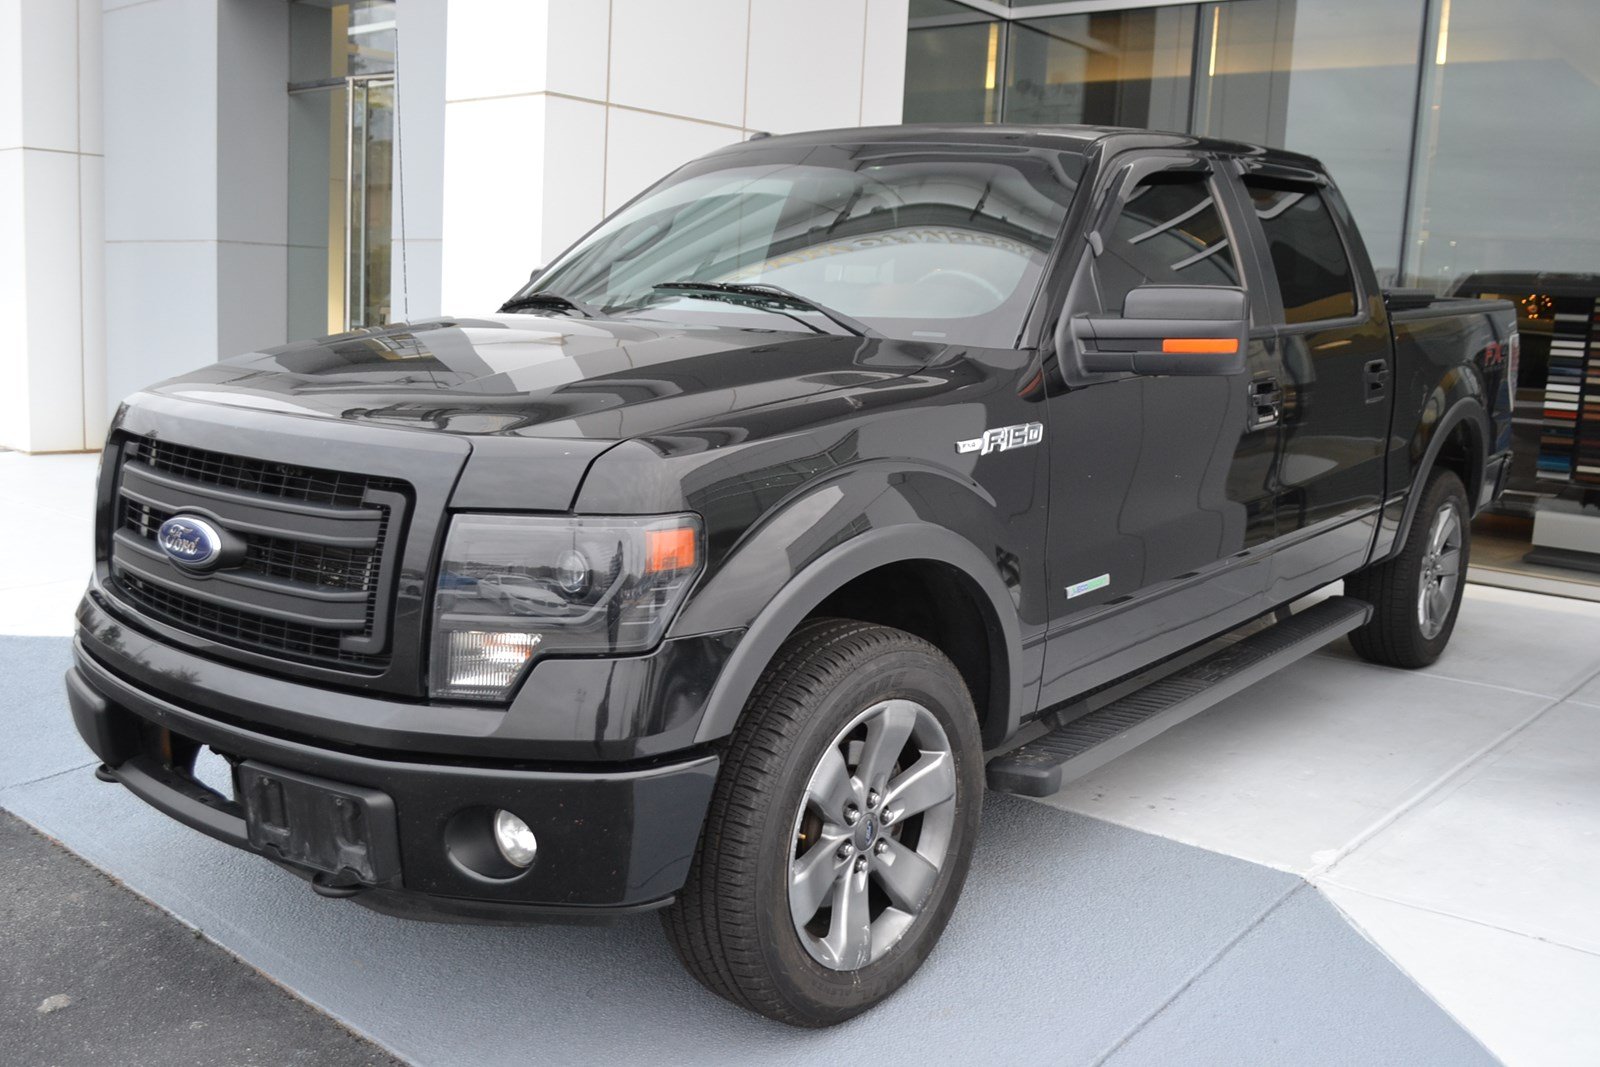 Pre-Owned 2013 Ford F-150 XL Crew Cab Pickup in Macon #BU8406 | Butler